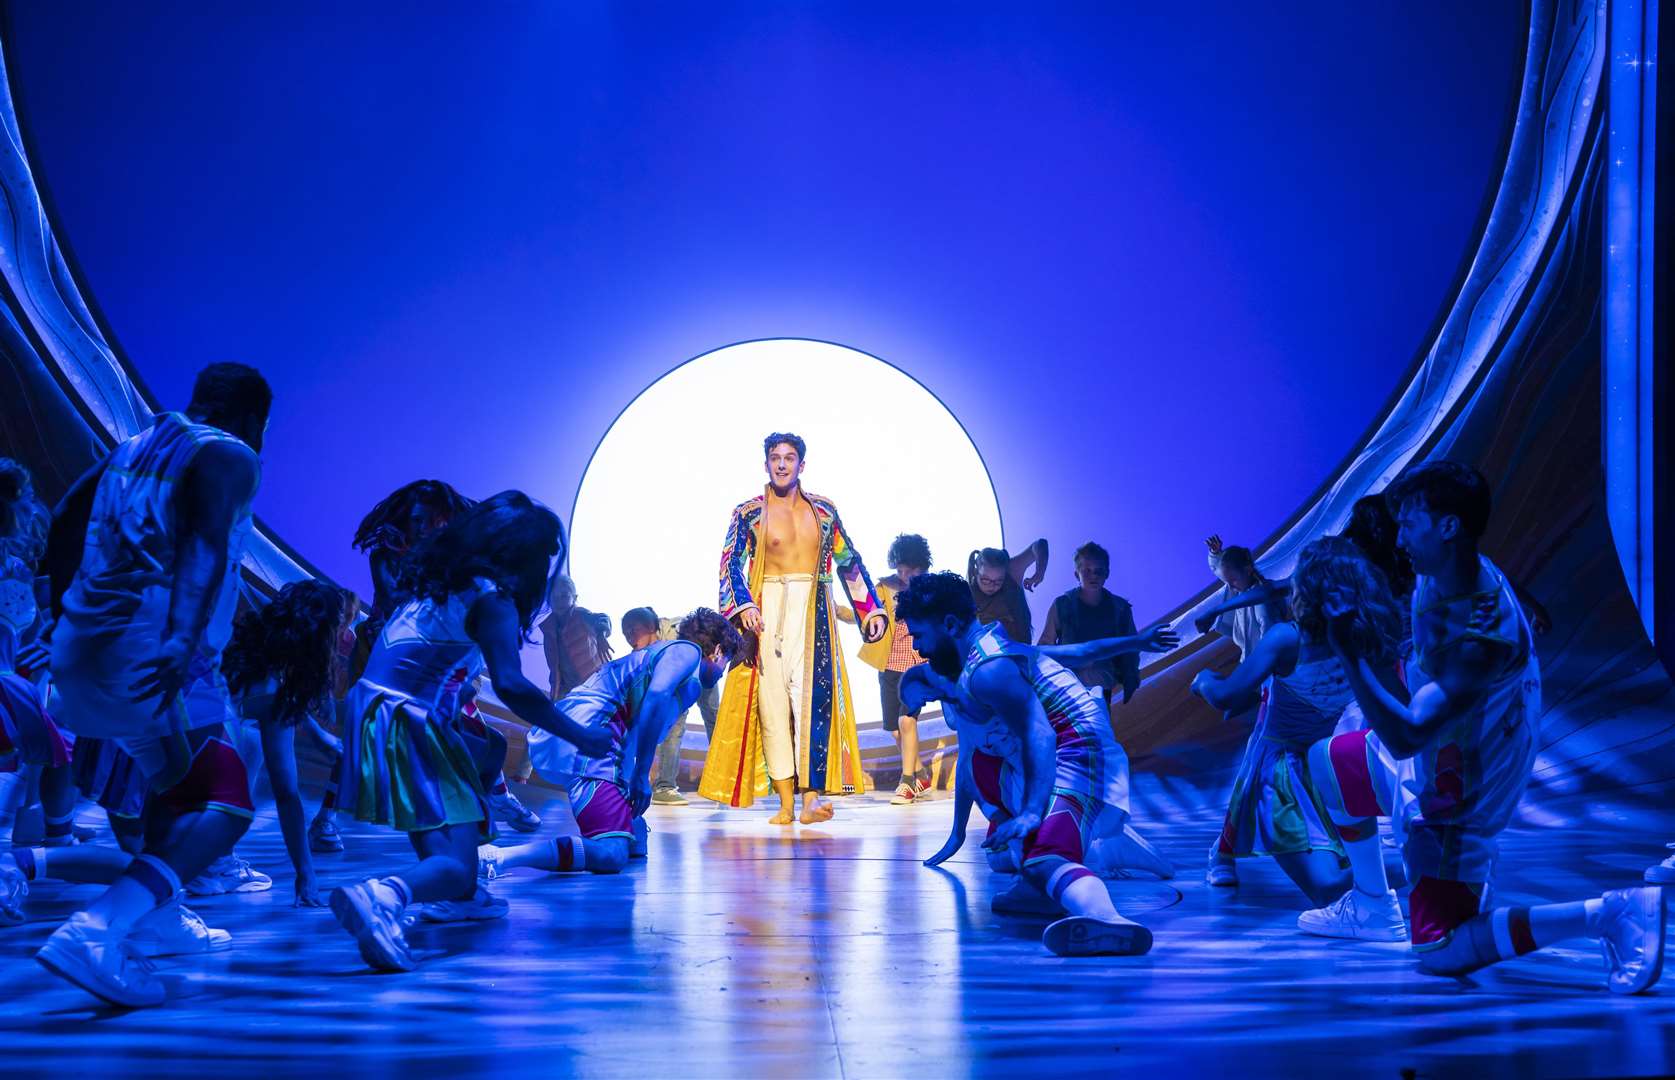 A scene from Joseph And The Amazing Technicolor Dreamcoat Tour @ Manchester Opera House. (Opening 29-03-2022) ©Tristram Kenton 03-22 (3 Raveley Street, LONDON NW5 2HX TEL 0207 267 5550 Mob 07973 617 355)email: tristram@tristramkenton.com